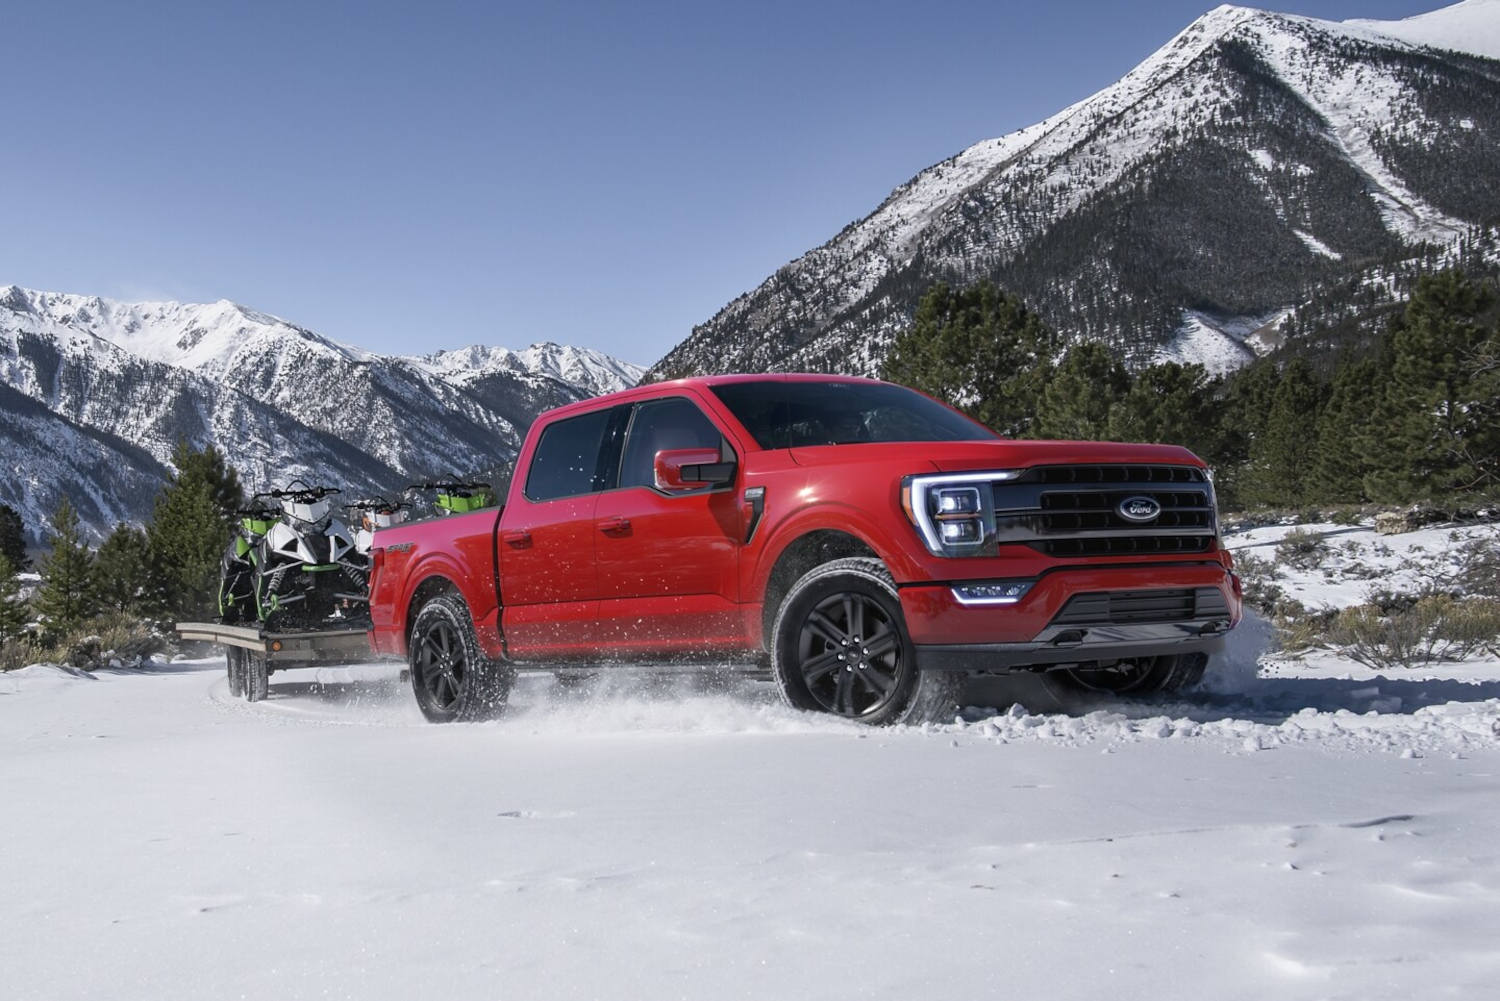 This Ford truck in the snow is the 2023 F-150